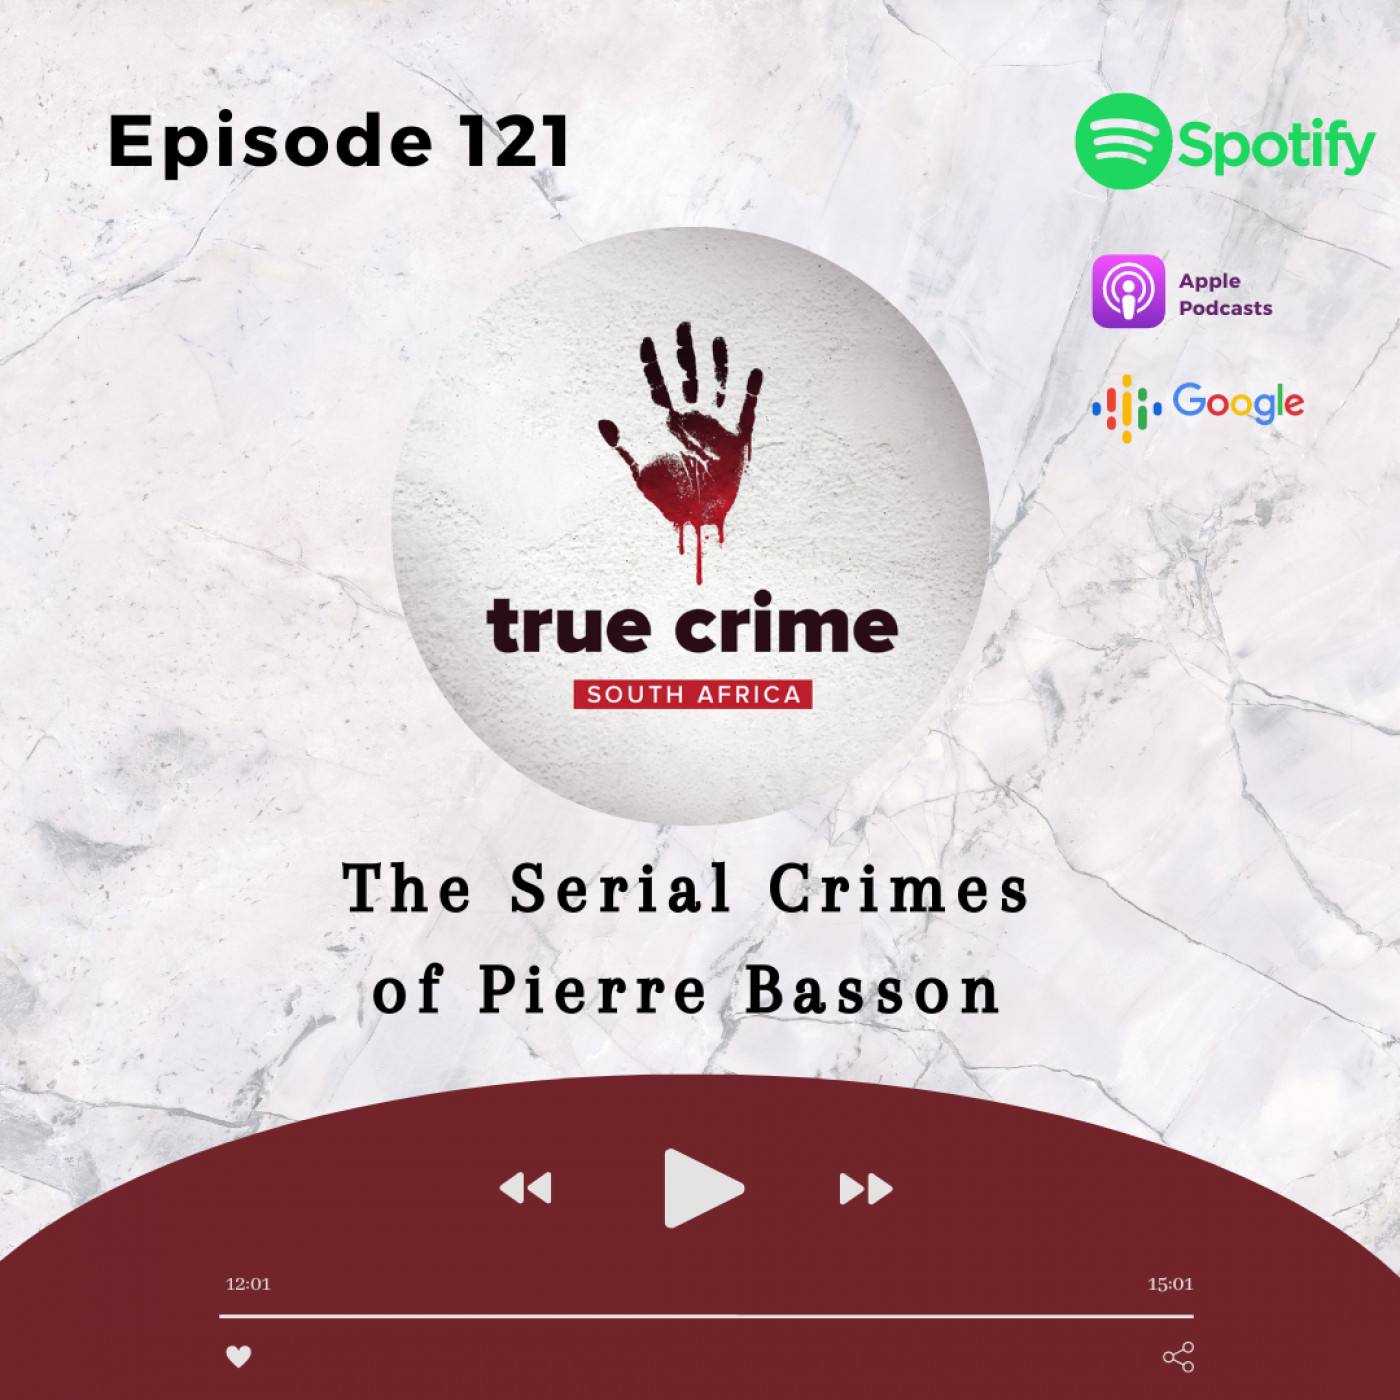 Episode 121 The Serial Crimes of Pierre Basson